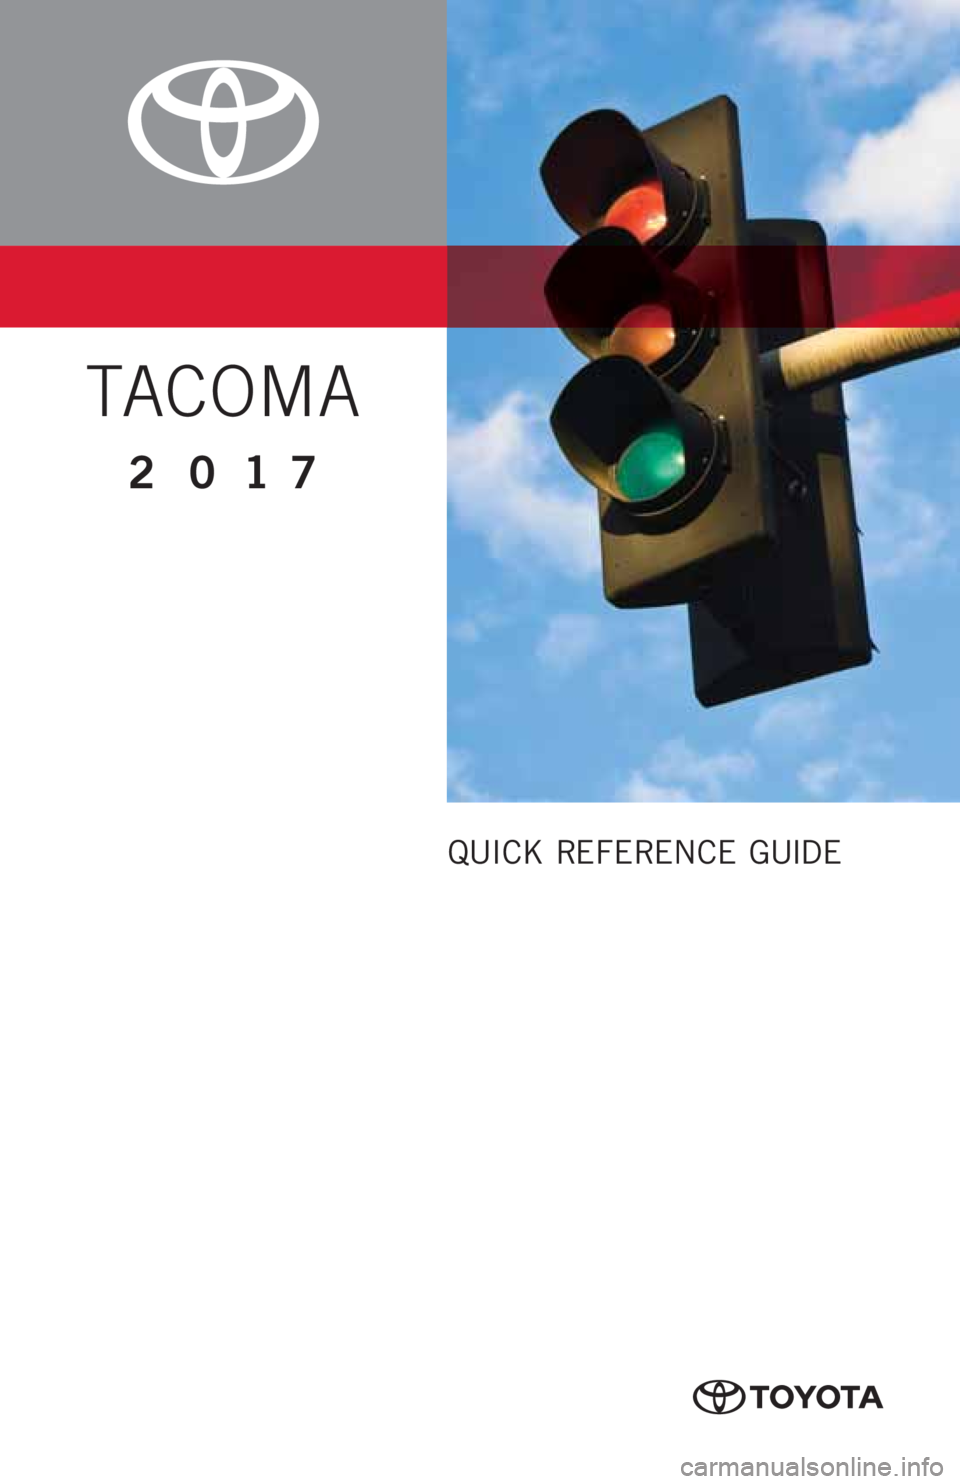 TOYOTA TACOMA 2017  Owners Manual (in English) QUICK REFERENCE GUIDE
TACOMA
2017 